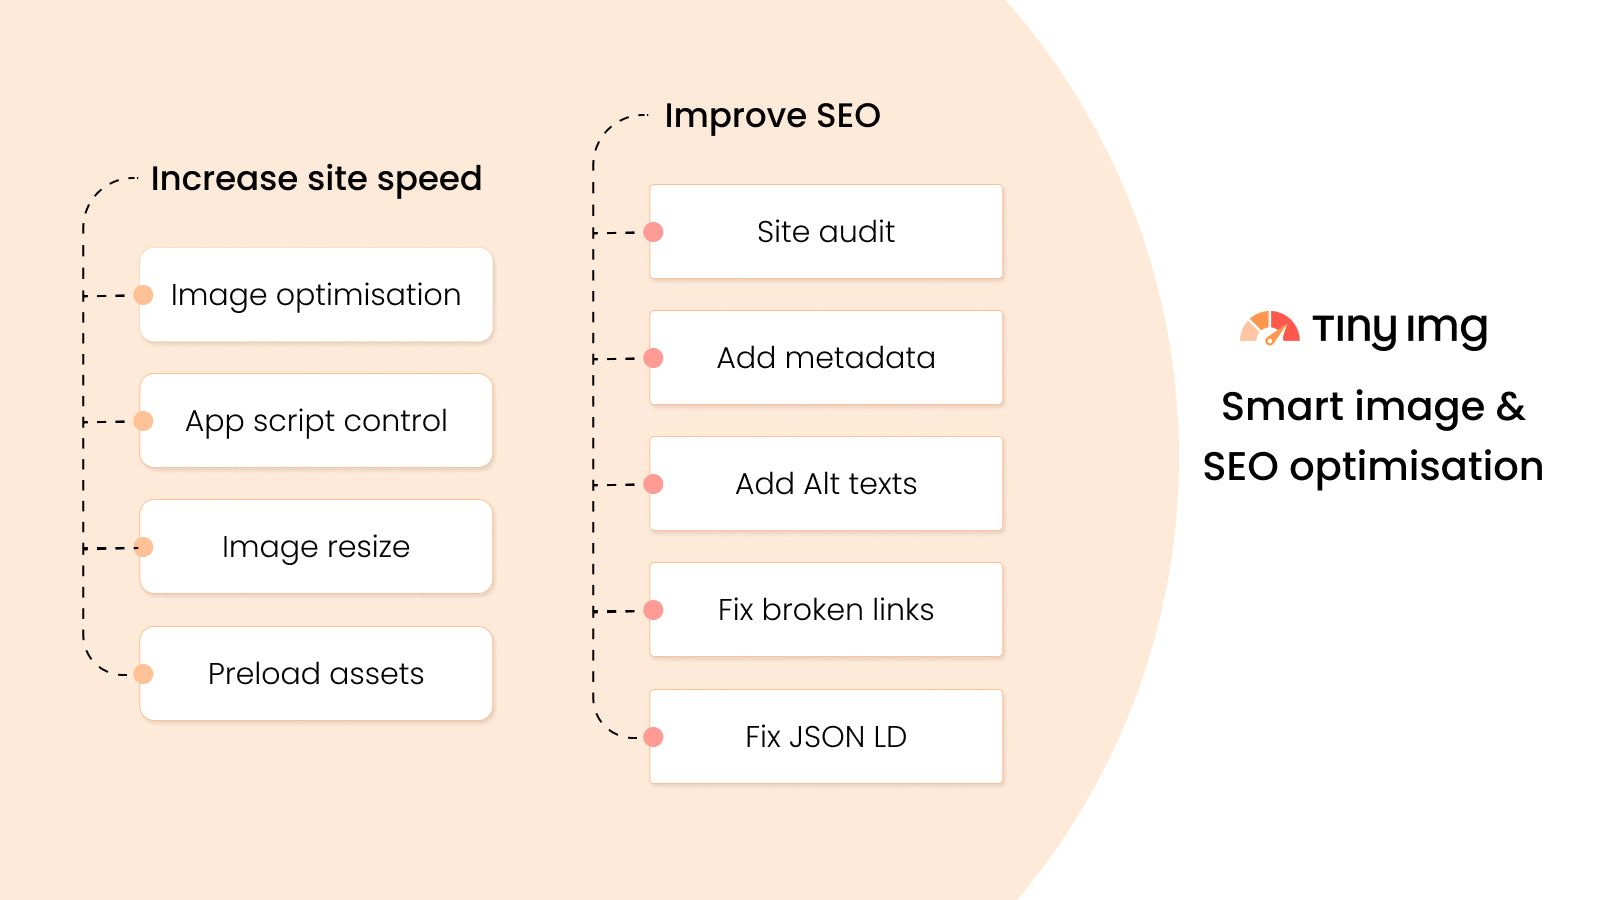 SEO optimization and speed improvement features at a glance